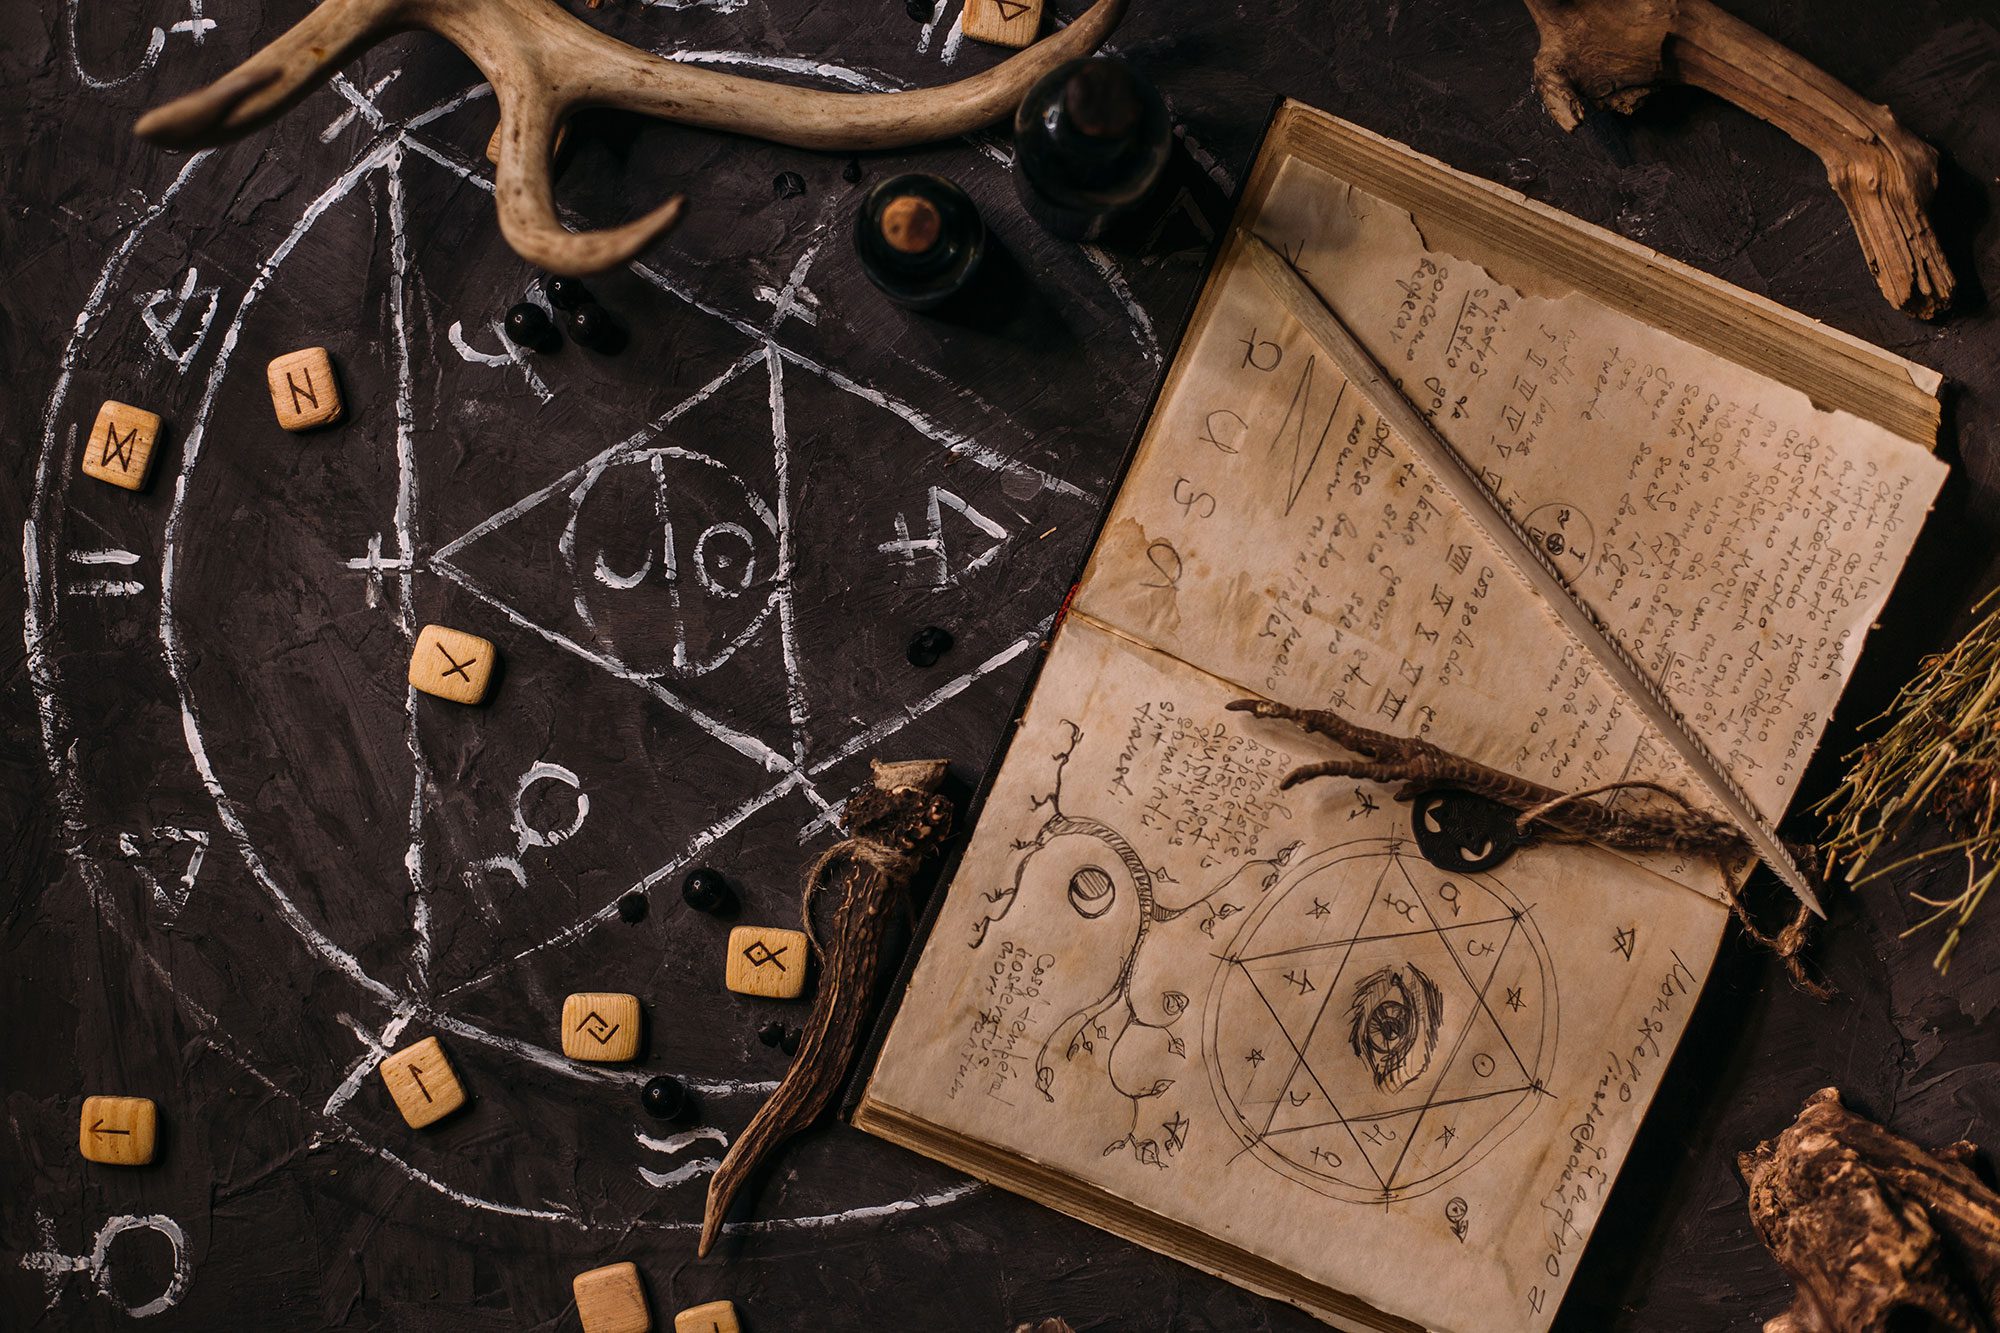 The truth about spells and curses, origins, beliefs